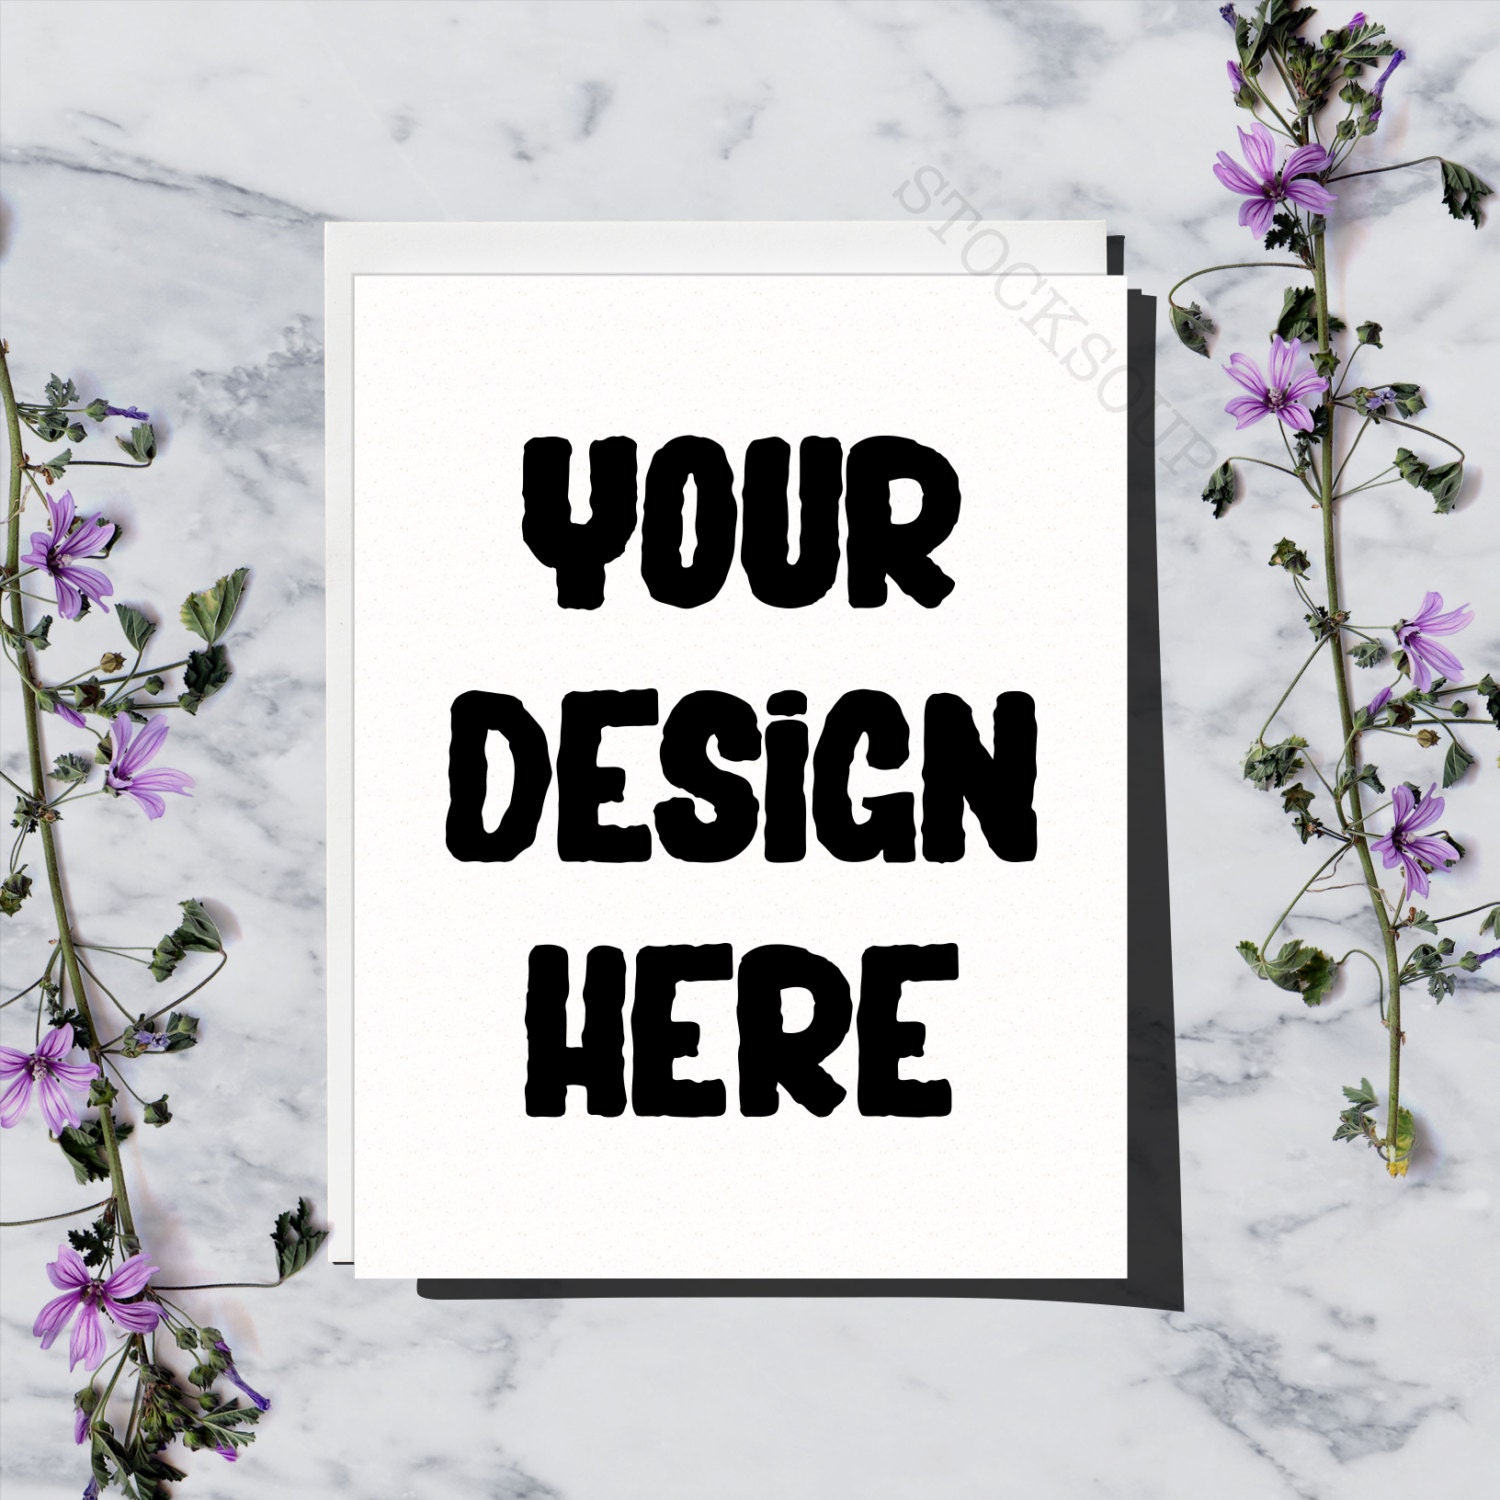 Vertical Card Mockup / Empty Greeting Card Mockup / Styled